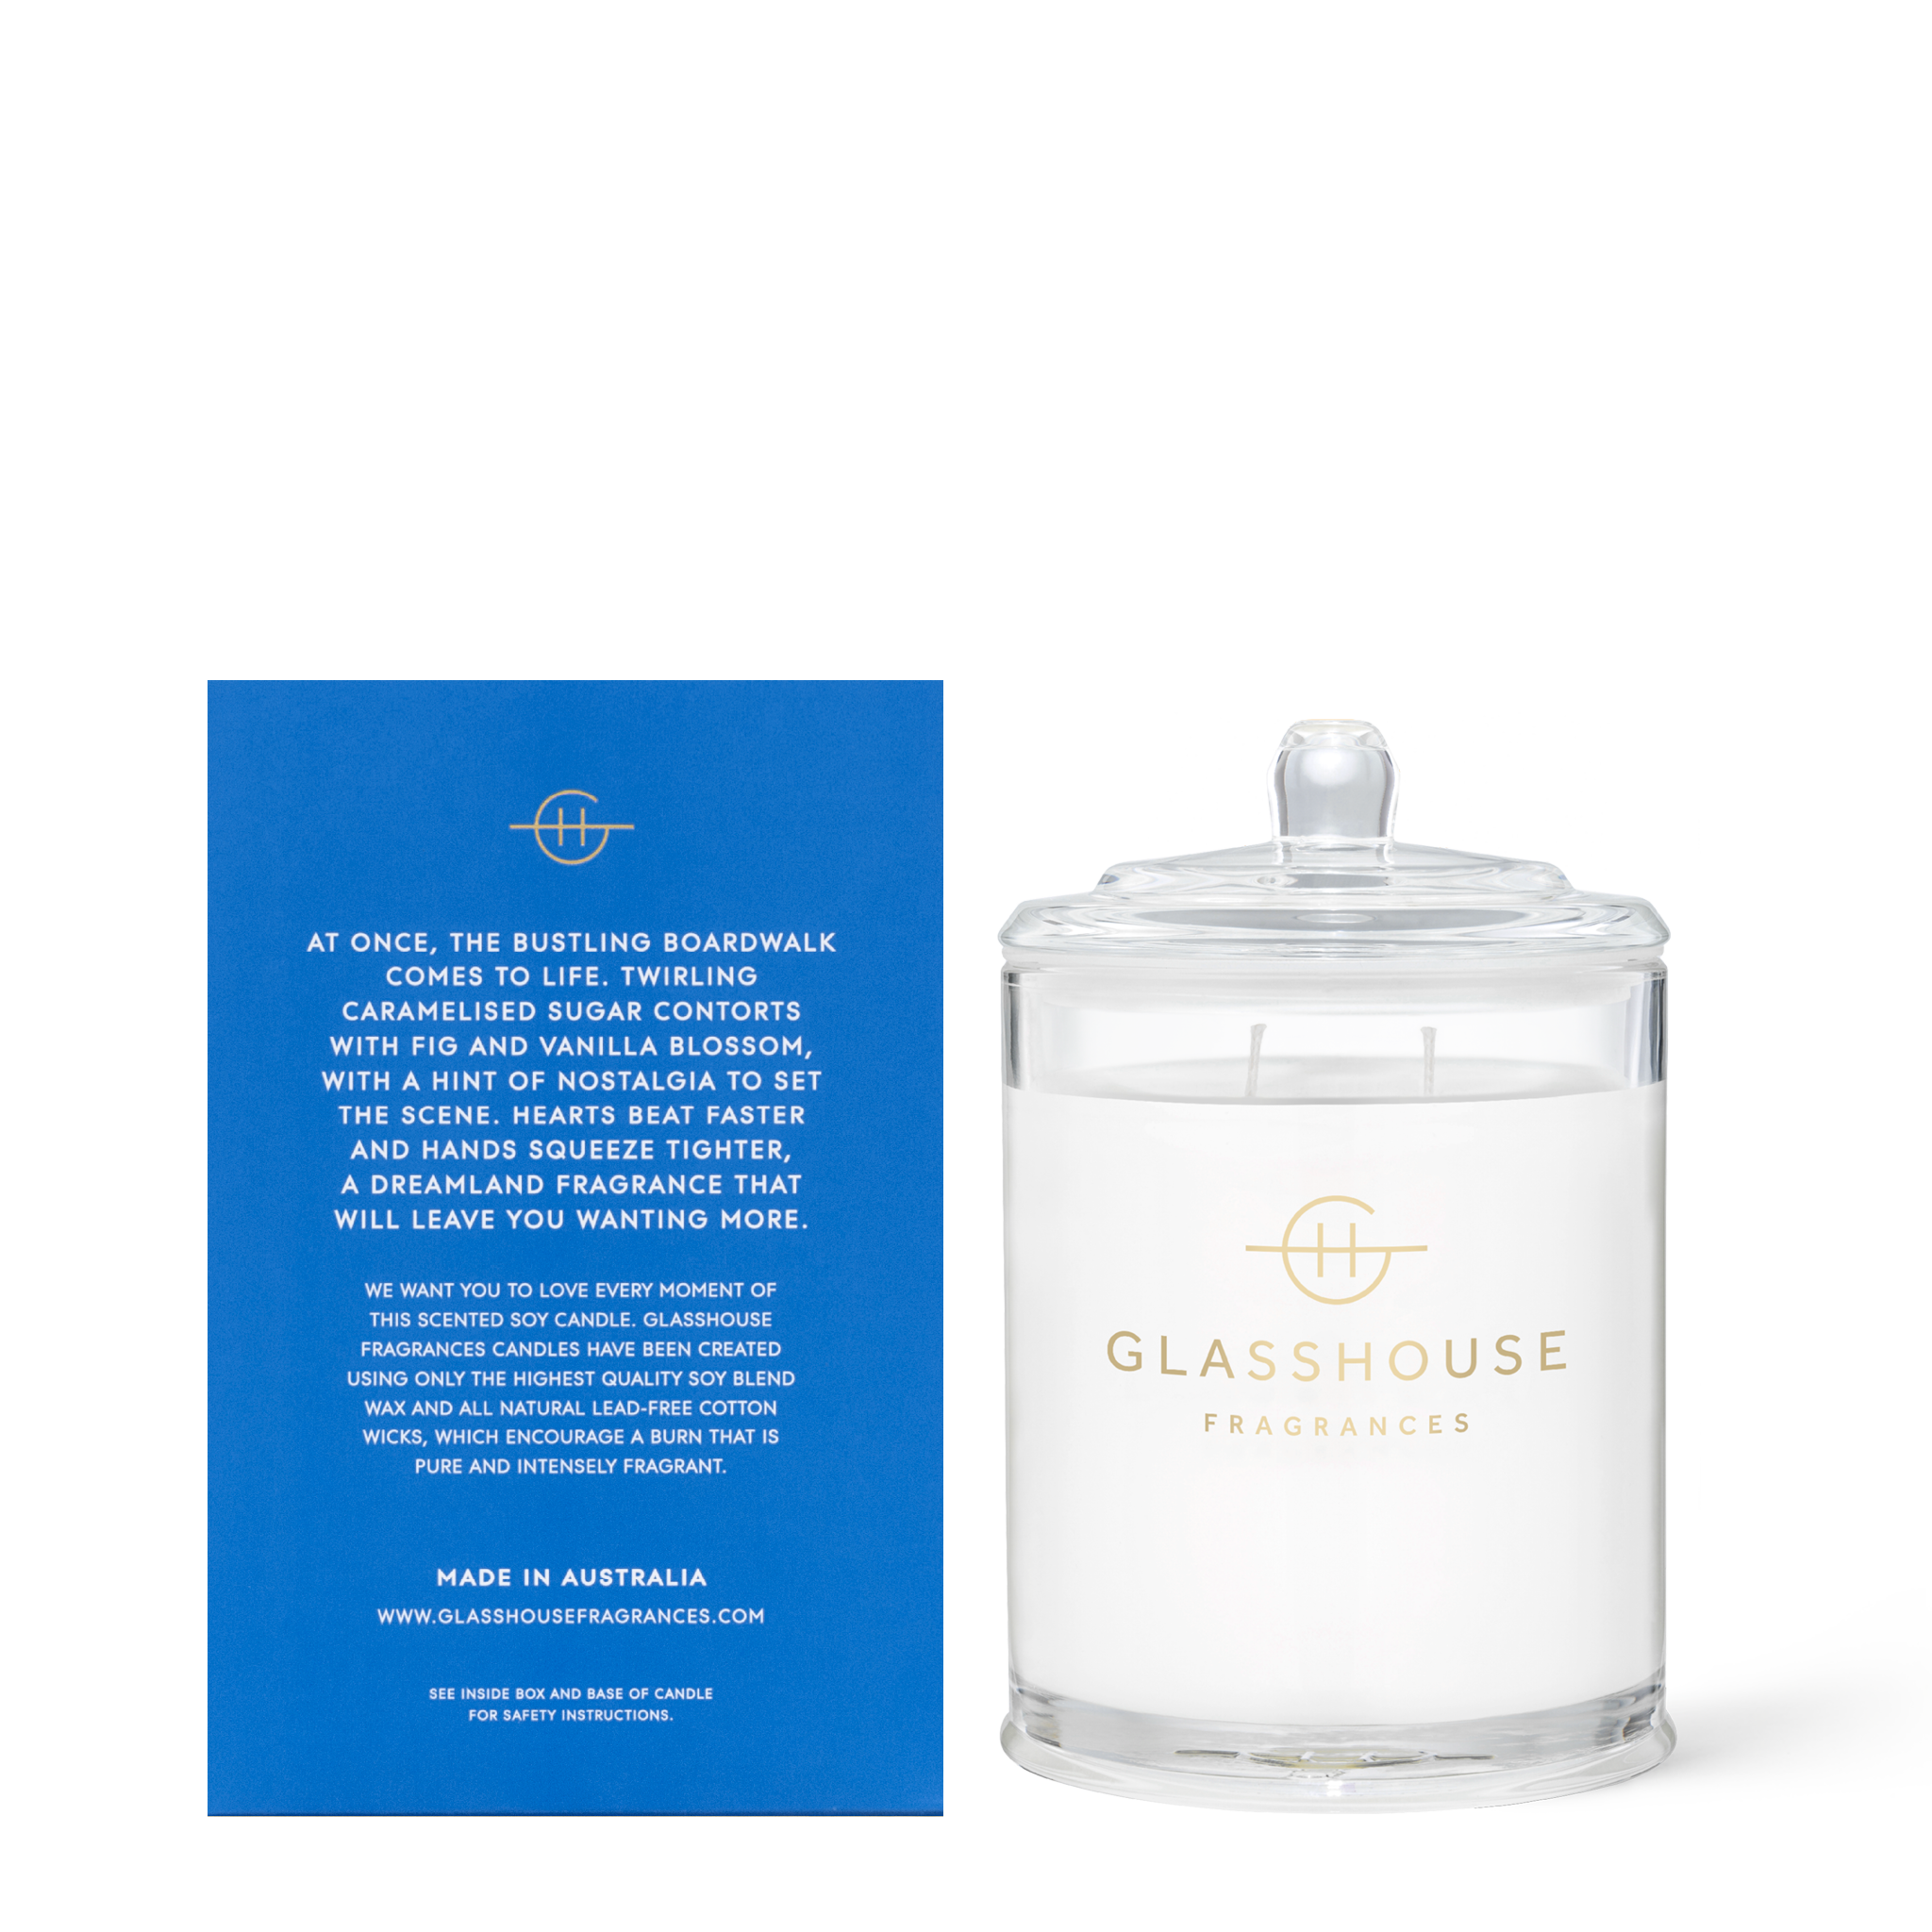 Glasshouse Fragrances Tales of Coney Island Caramelised Sugar and Fig 380g Soy Candle with box - back of product shot